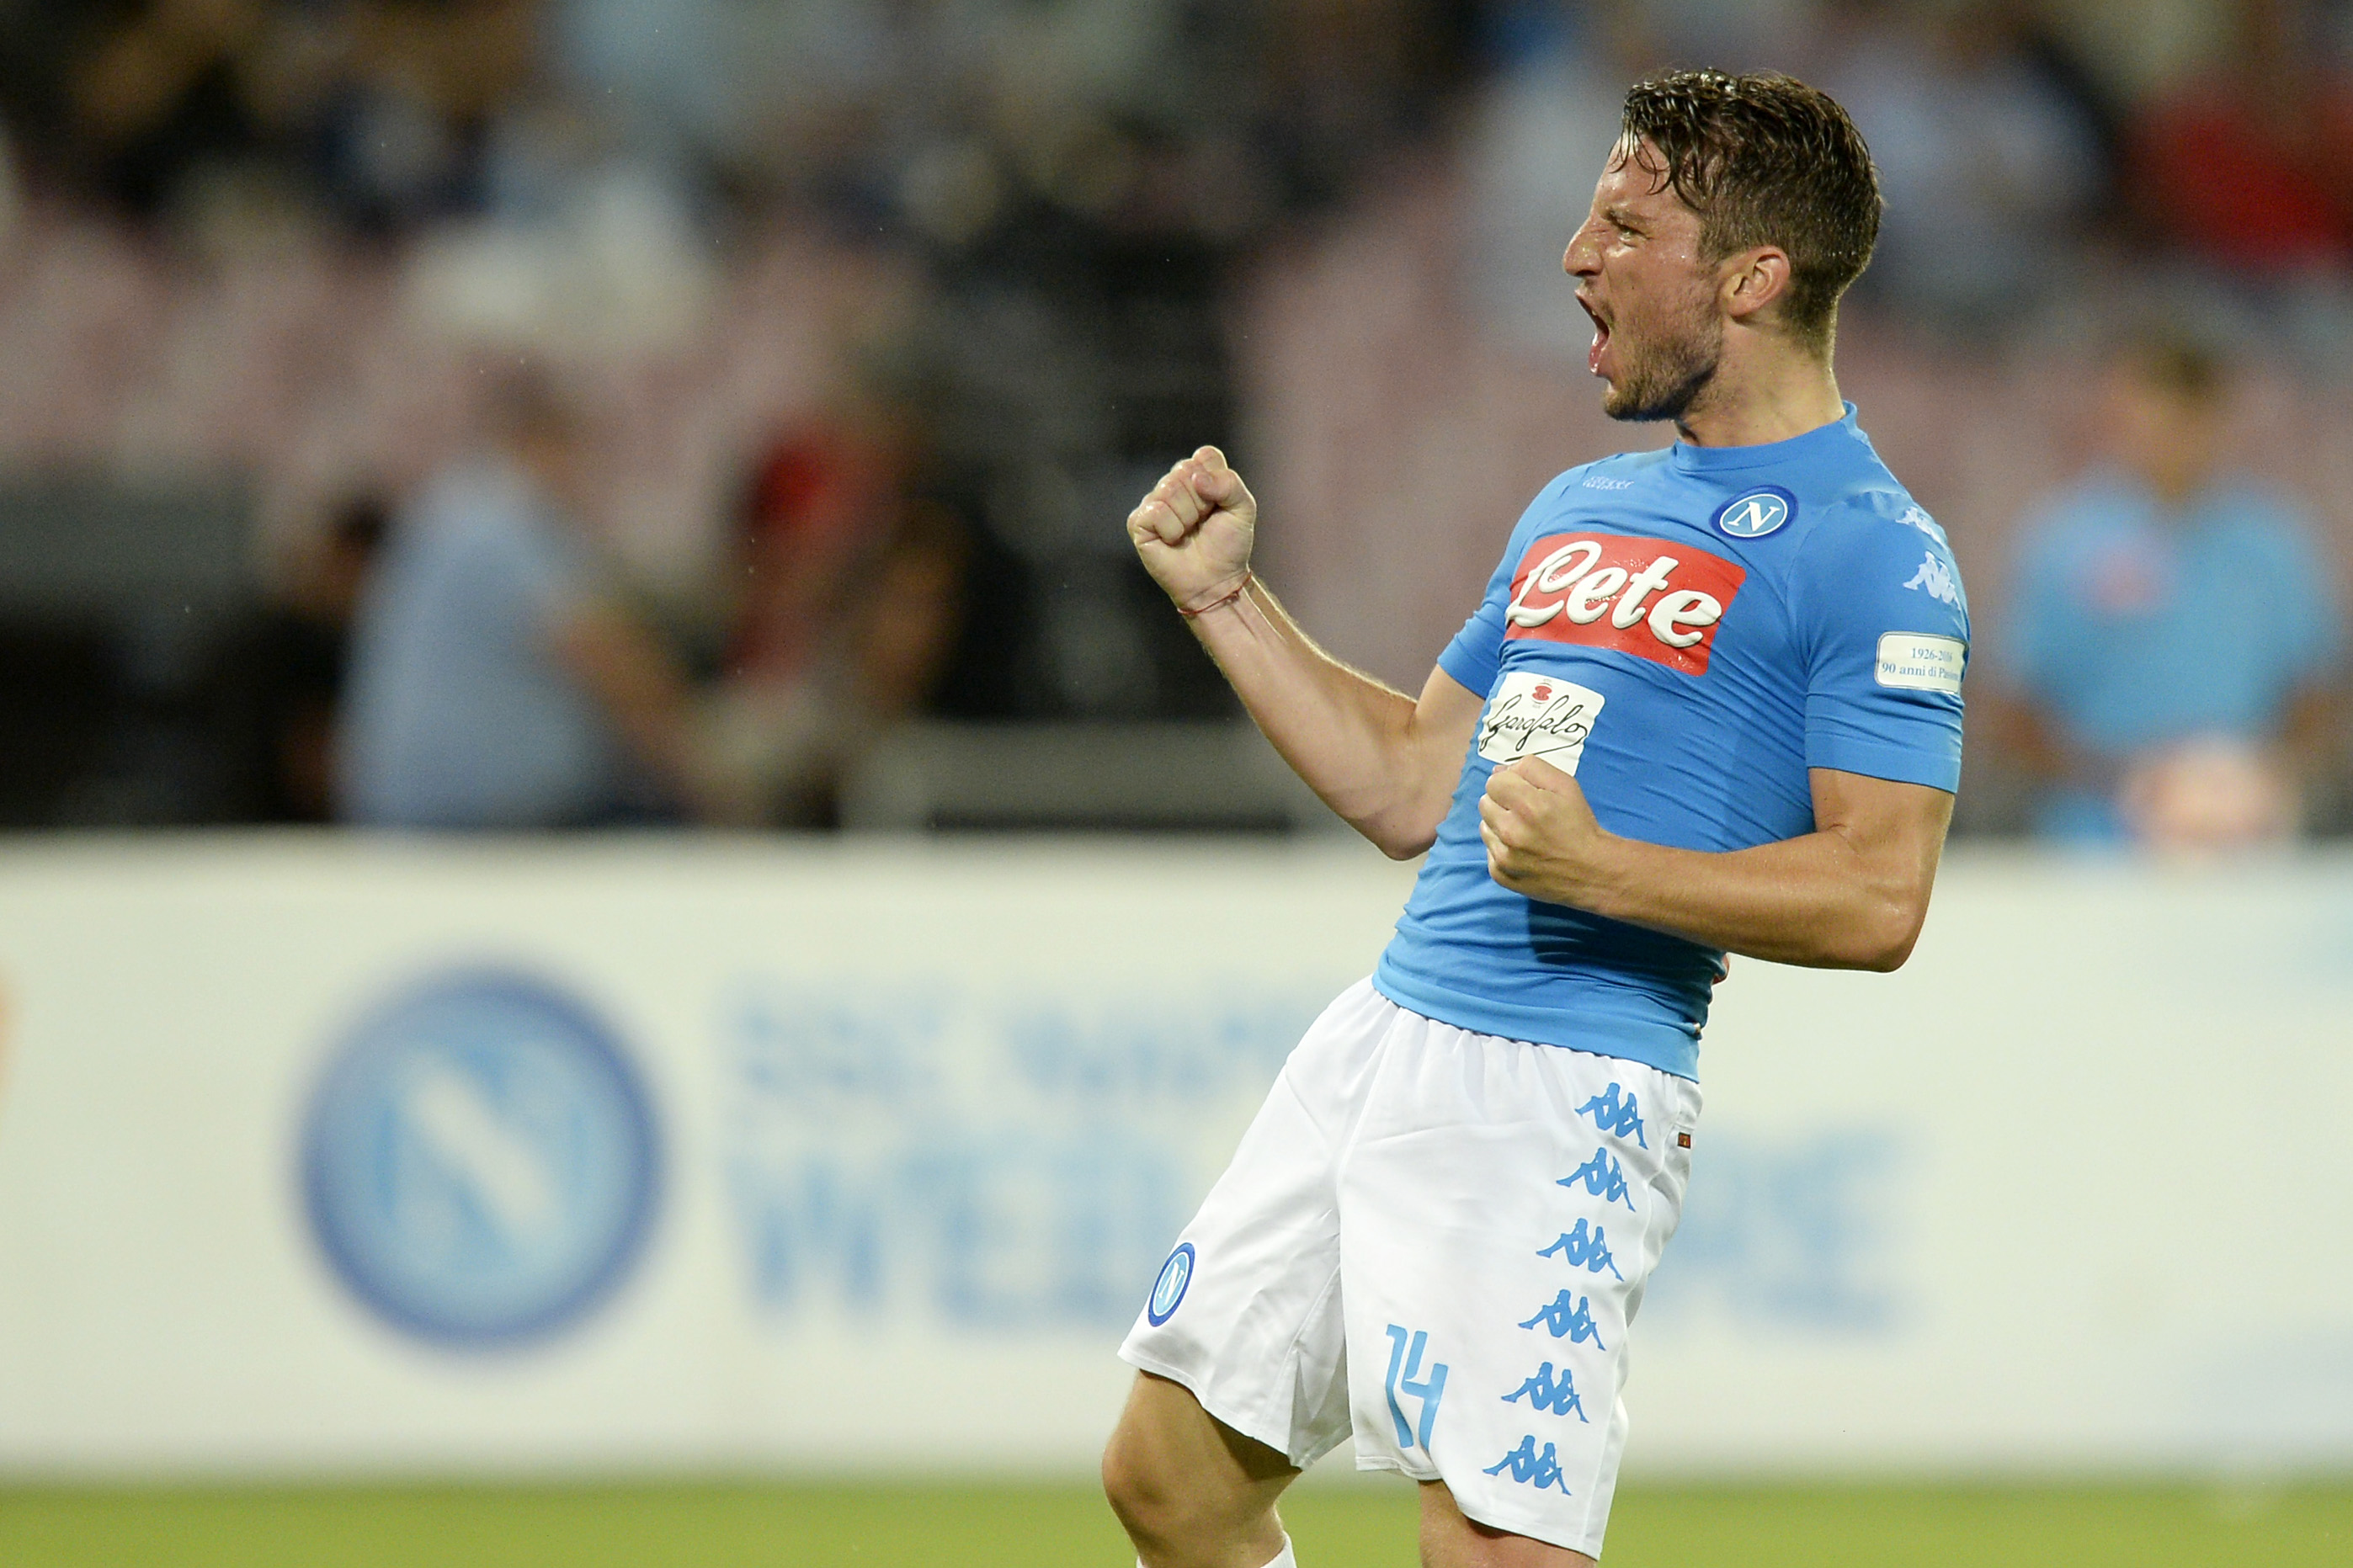 Napoli forward Dries Mertens celebrates after scoring. (Getty Images)